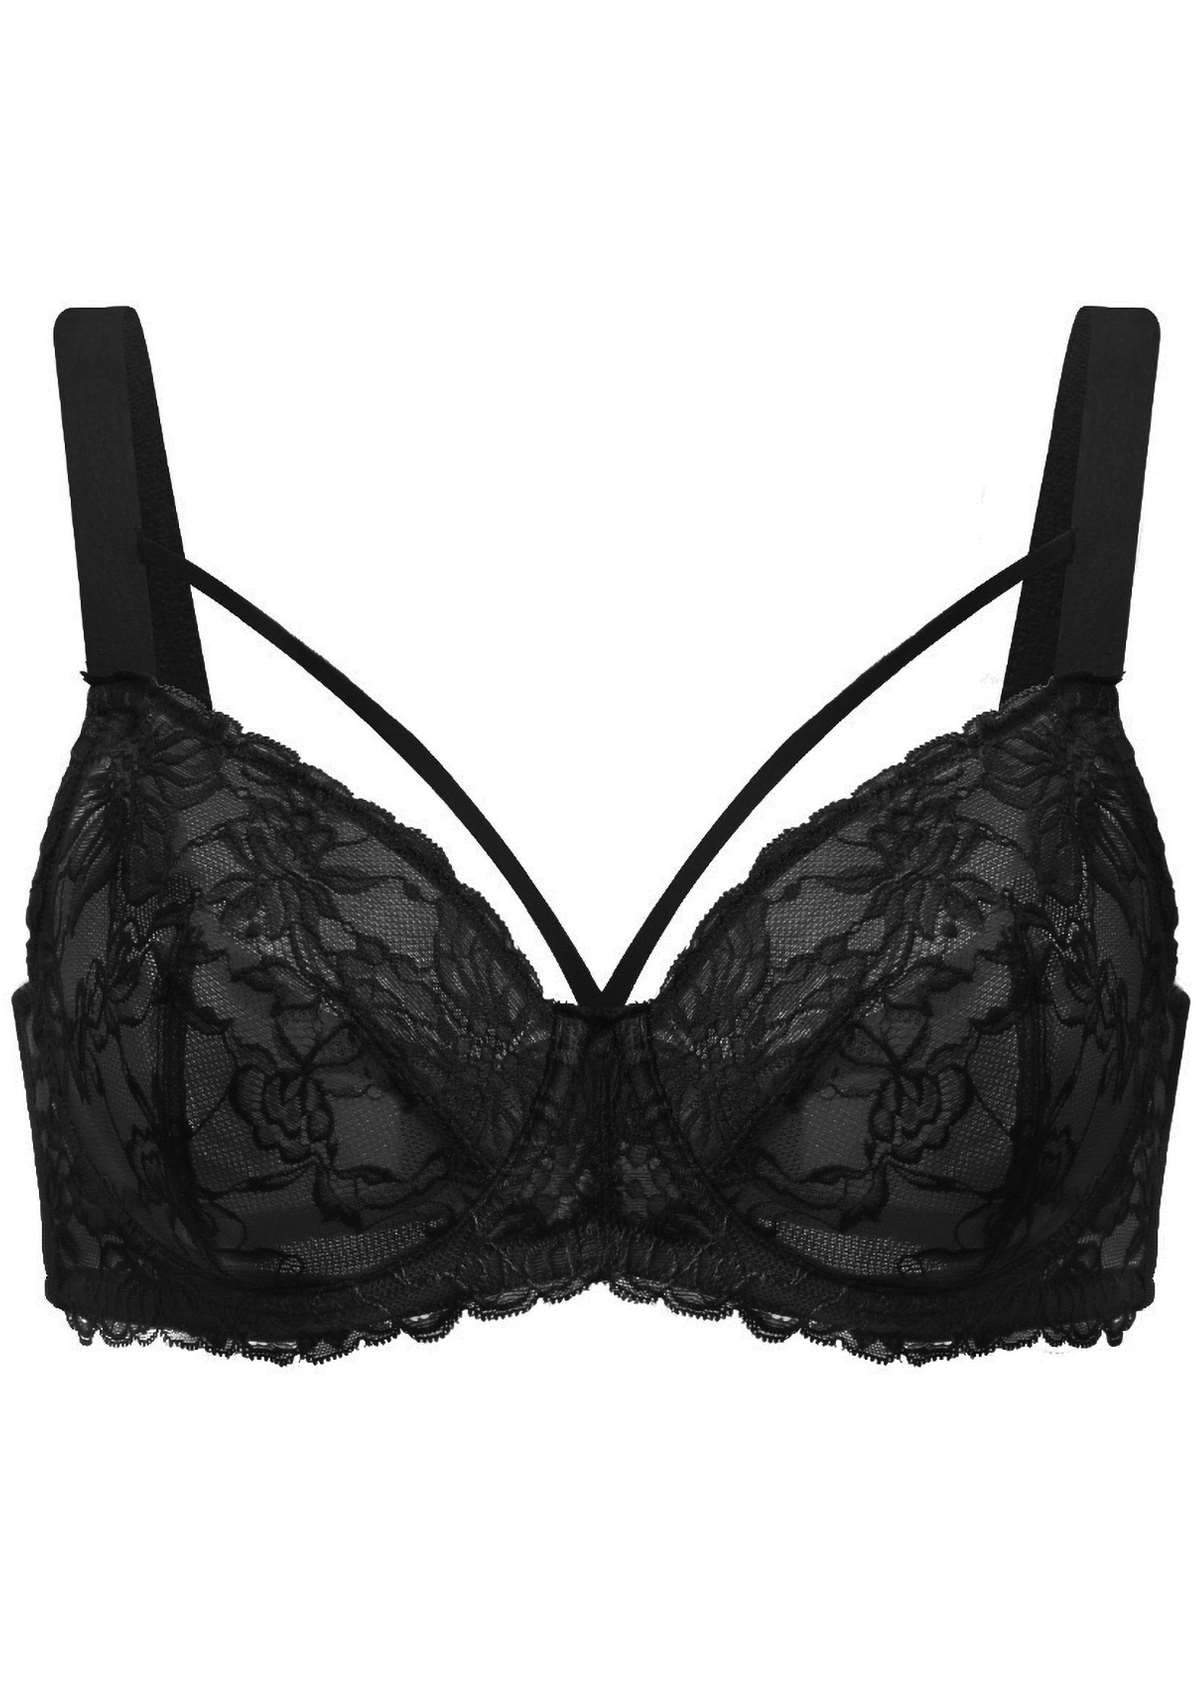 HSIA Pretty In Petals Bra - Plus Size Lingerie For Comfrot And Support - Black / 34 / C